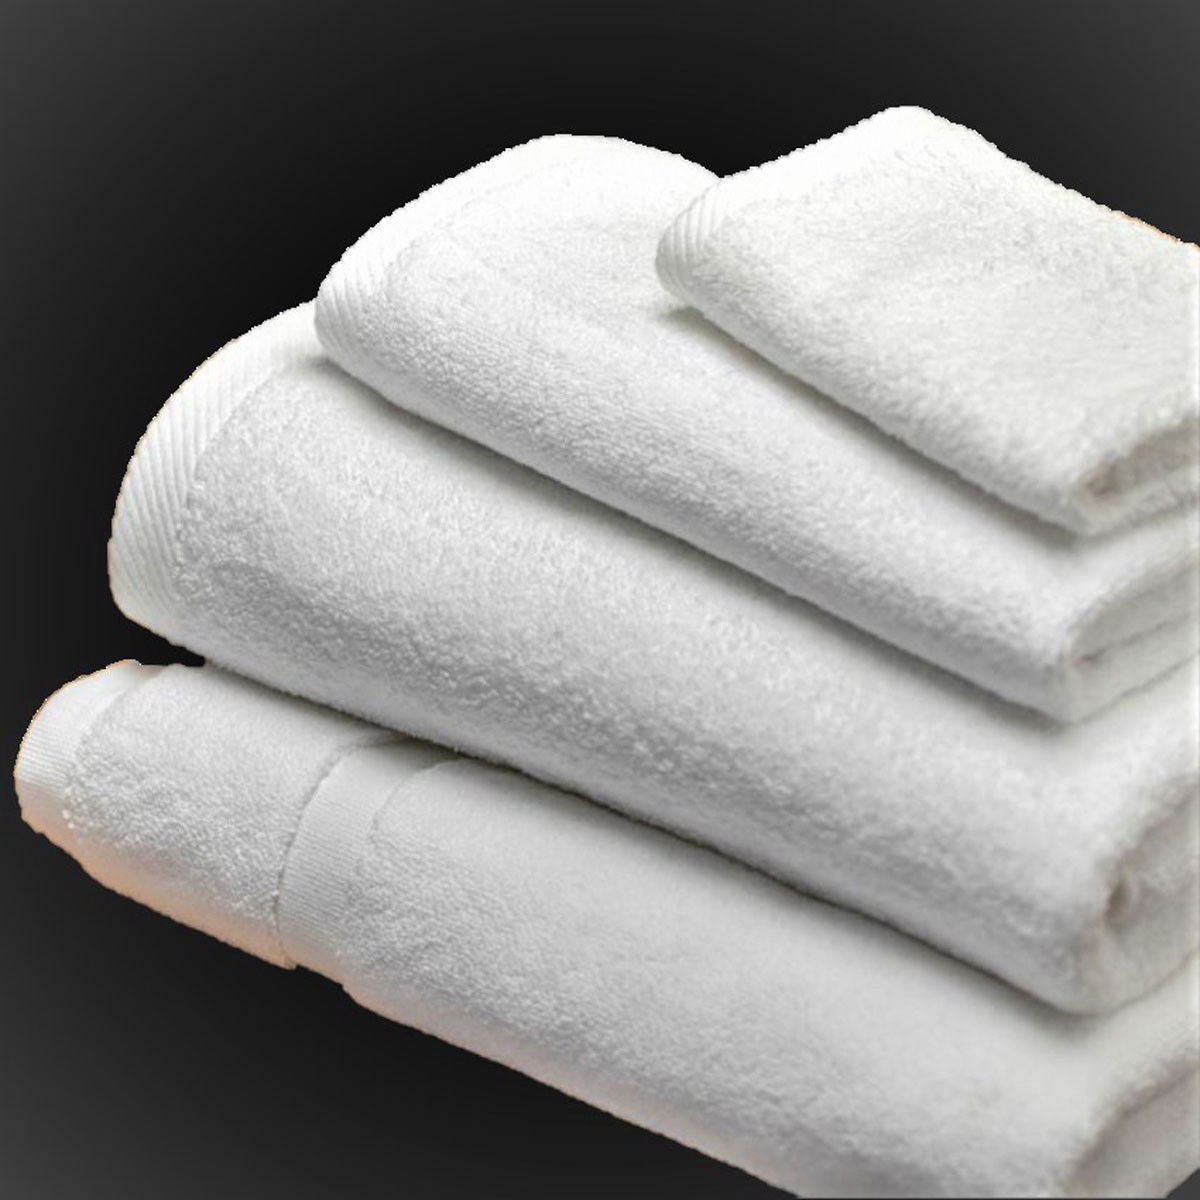 Why should I opt for golden mills towels for my spa?